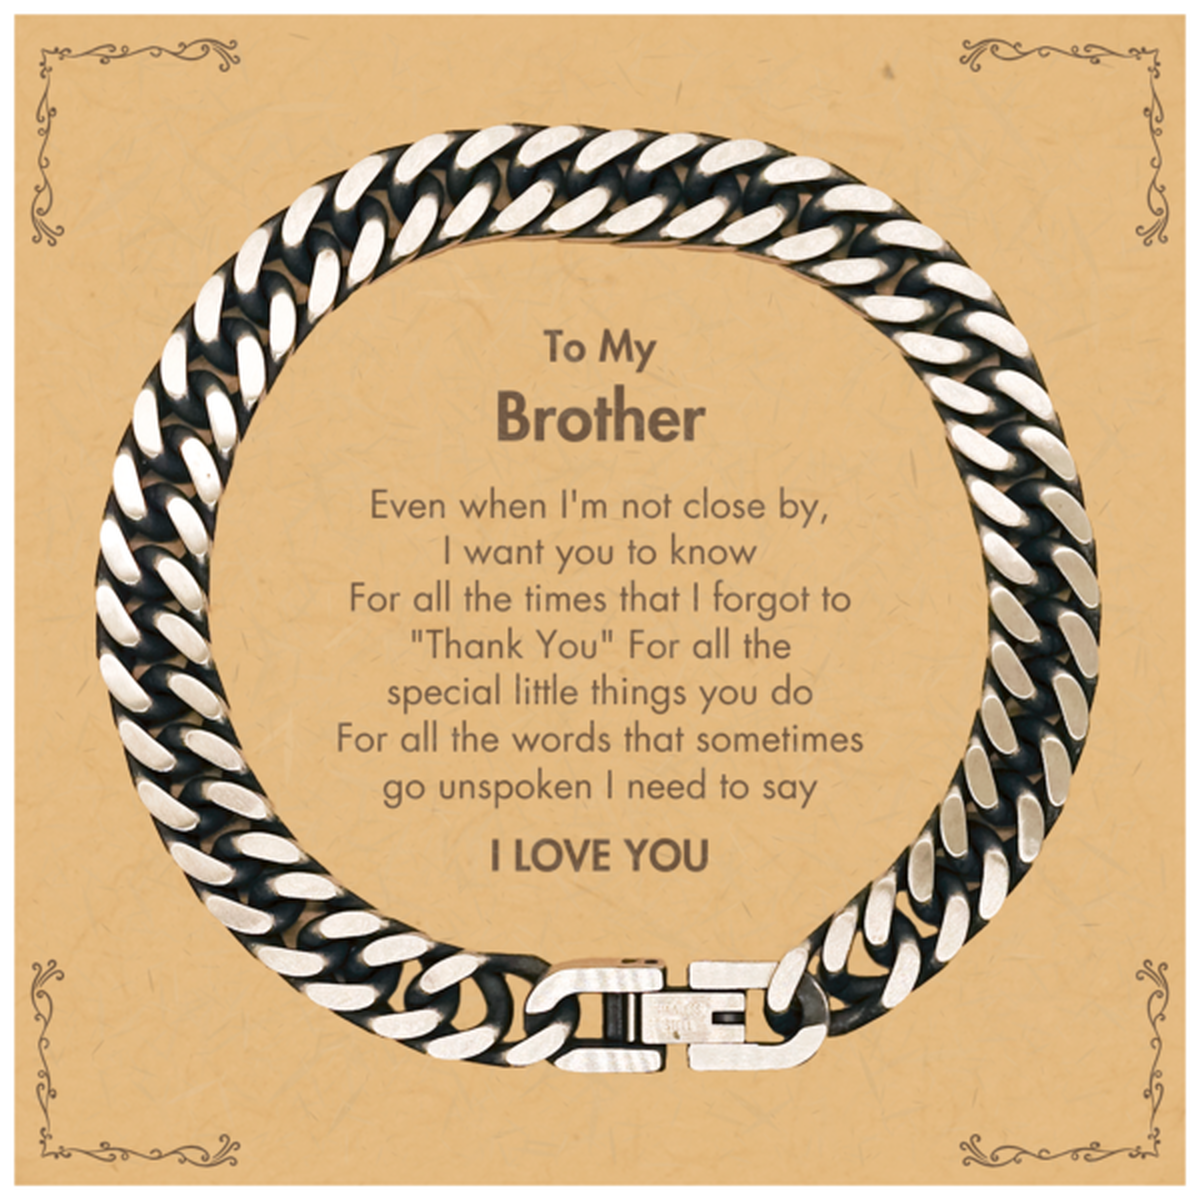 Thank You Gifts for Brother, Keepsake Cuban Link Chain Bracelet Gifts for Brother Birthday Mother's day Father's Day Brother For all the words That sometimes go unspoken I need to say I LOVE YOU